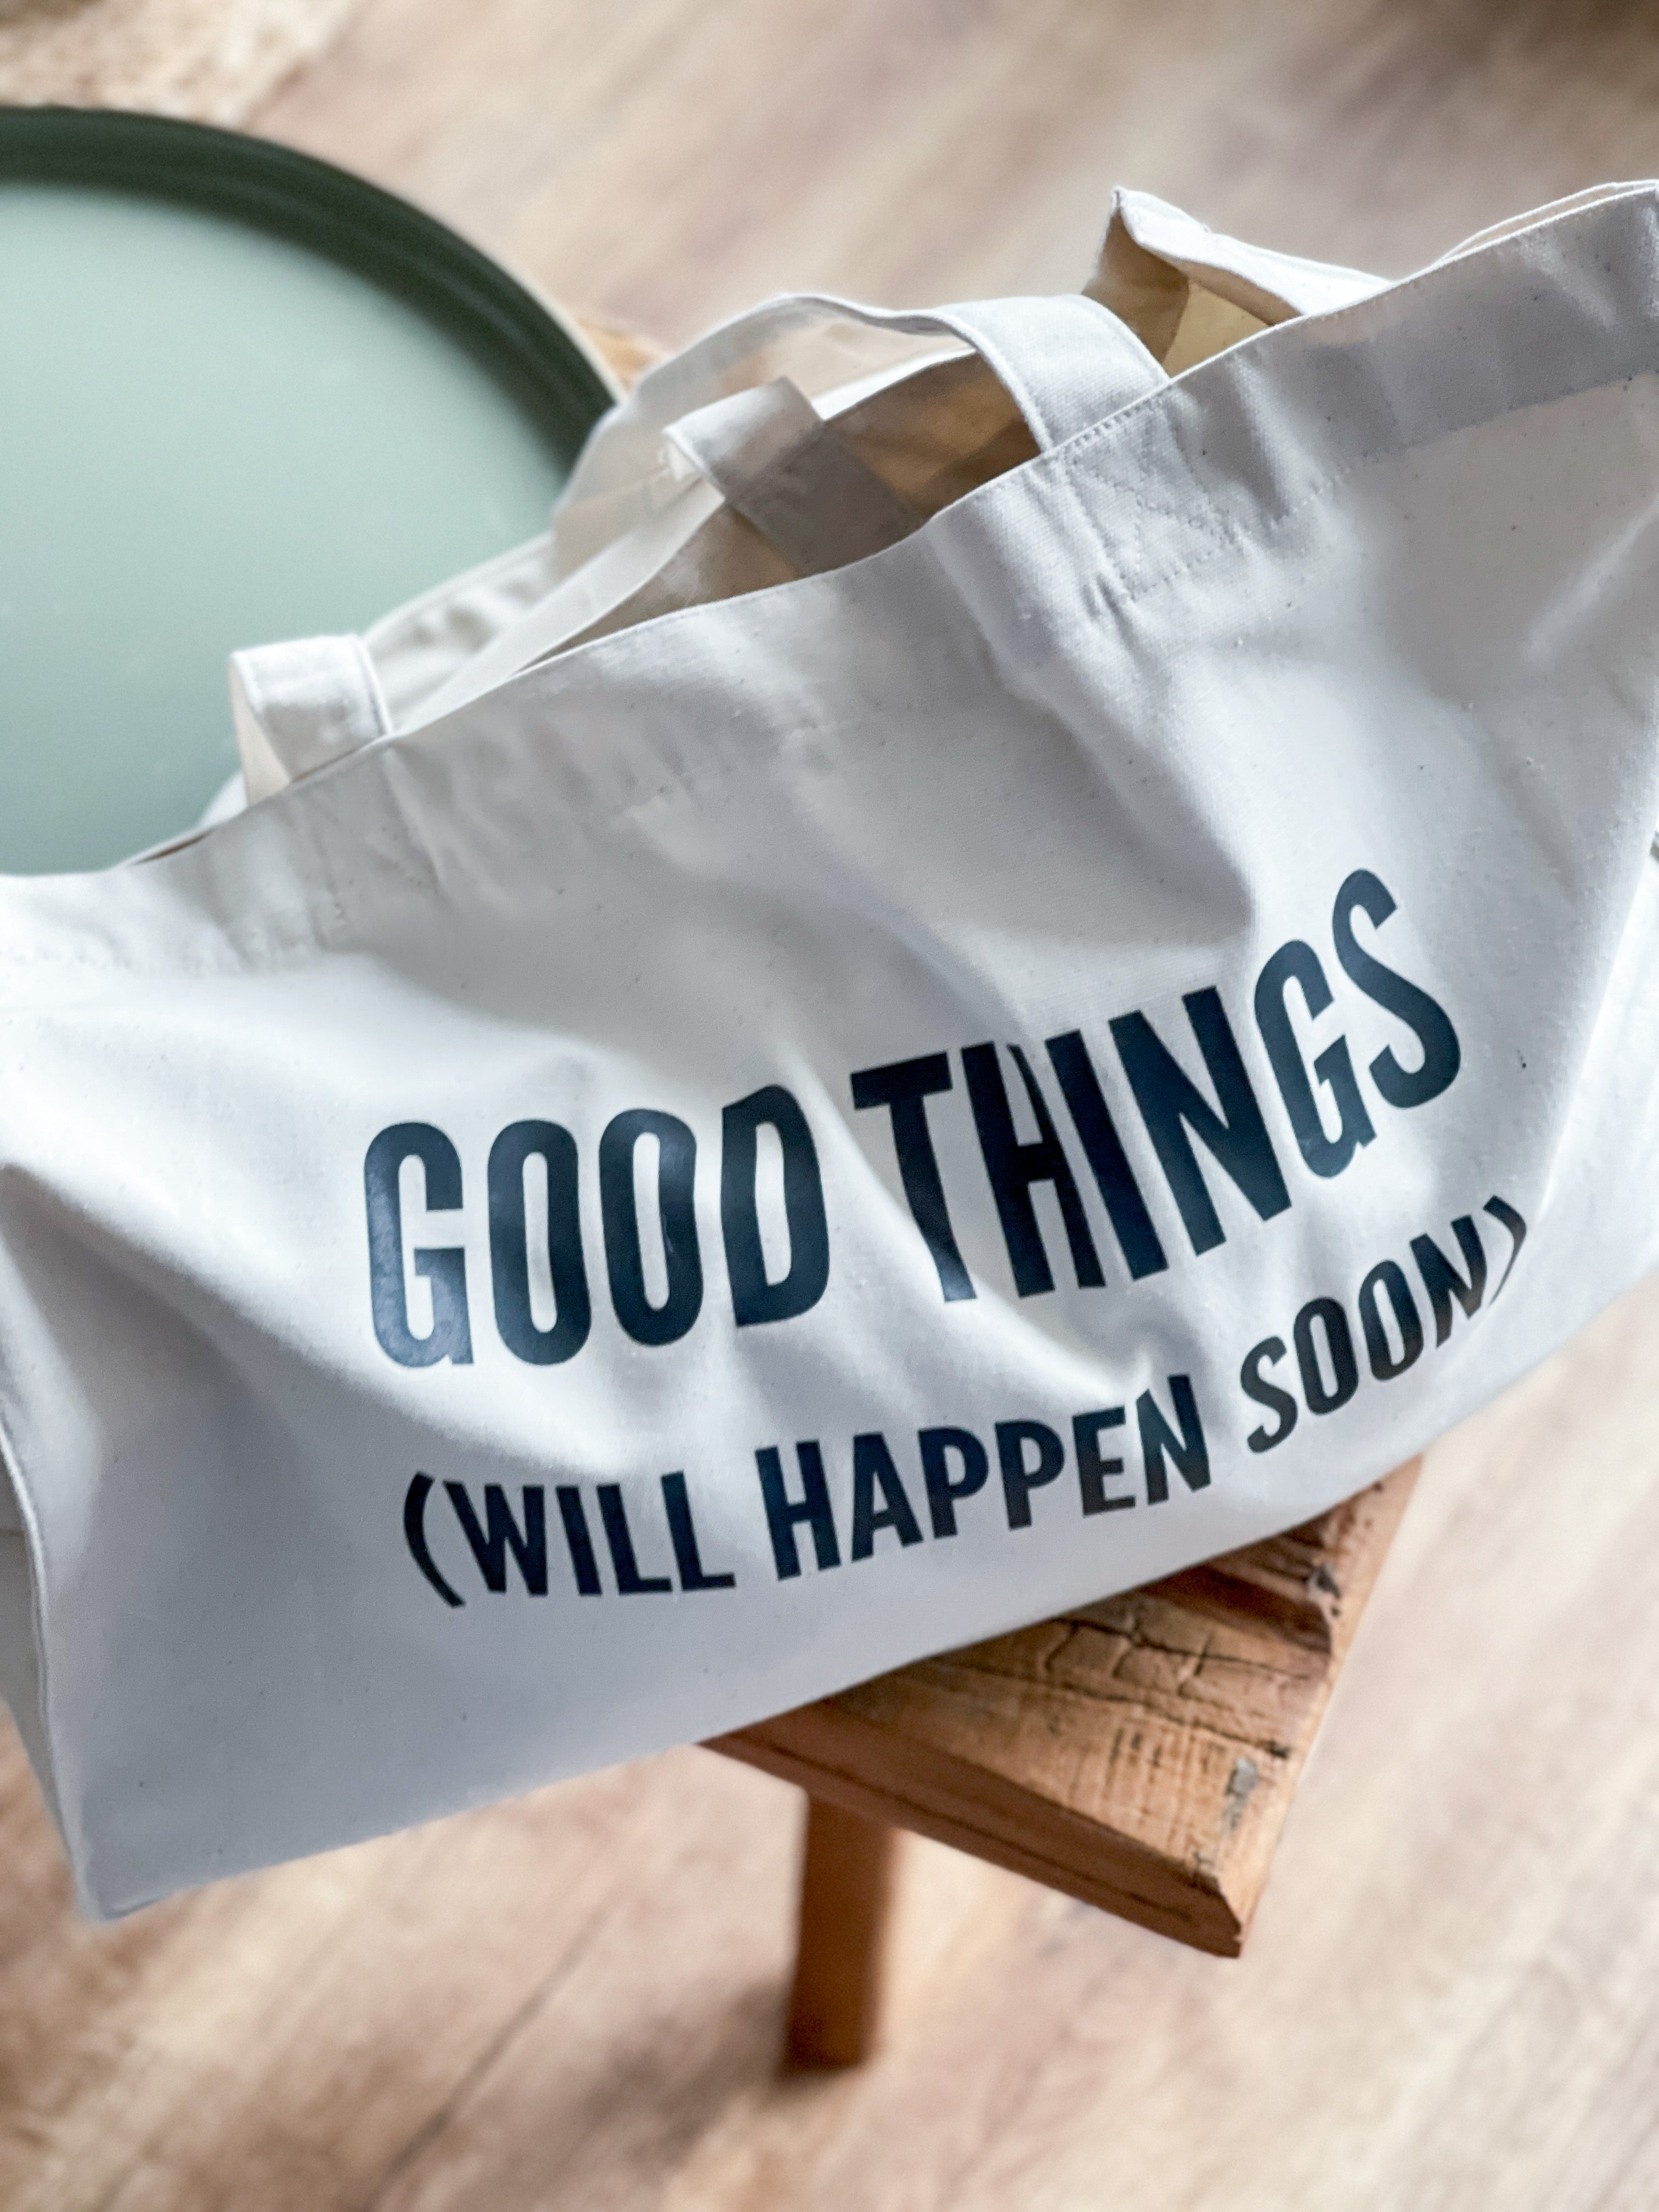 OH HAPPY LIFE SHOPPER "GOOD THINGS WILL HAPPEN SOON"